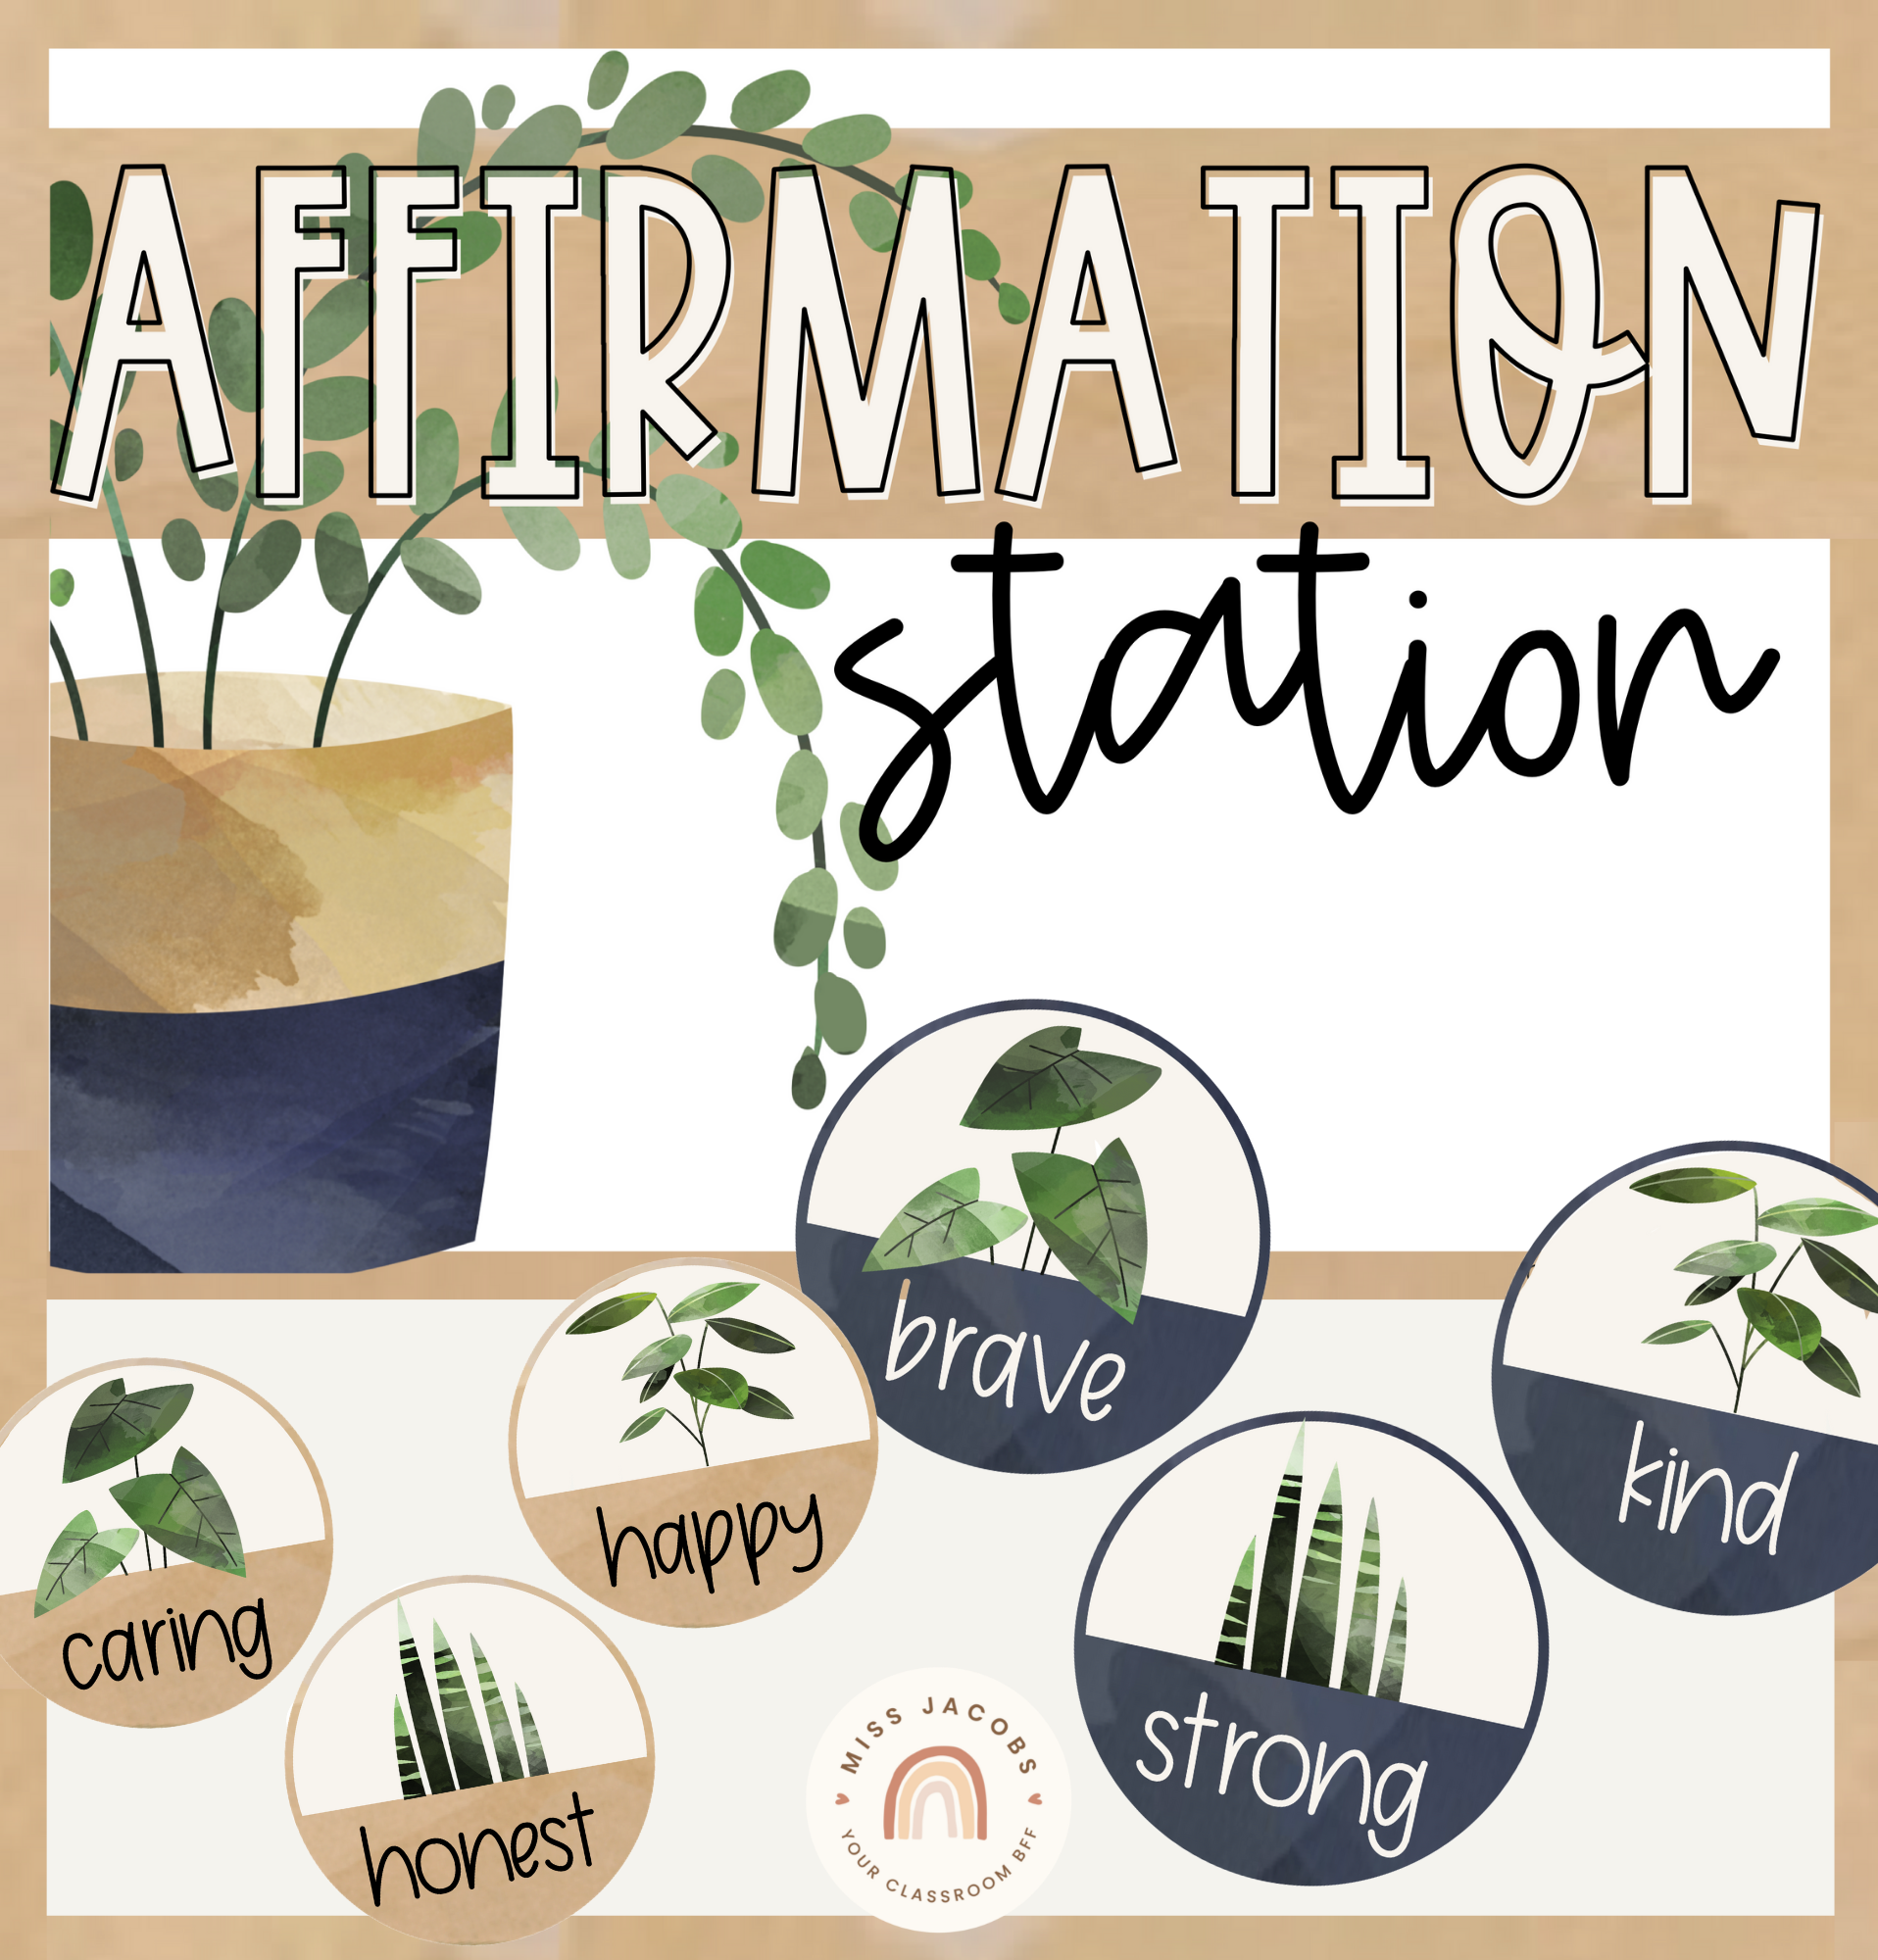 Two images are shown. On the left a graphic shows some of the elements of the Affirmation Station Display. We see illustrated plants in camel, green and blue-gray tones. The words caring, happy, honest, brave, strong and kind are shown. On the right we see the display created in an office setting - an arch shaped mirror is surrounded by circular affirmations each with a plant illustration. The top of the mirror says ‘I am’ and the affirmations include enough, patient, a leader, grateful and happy.